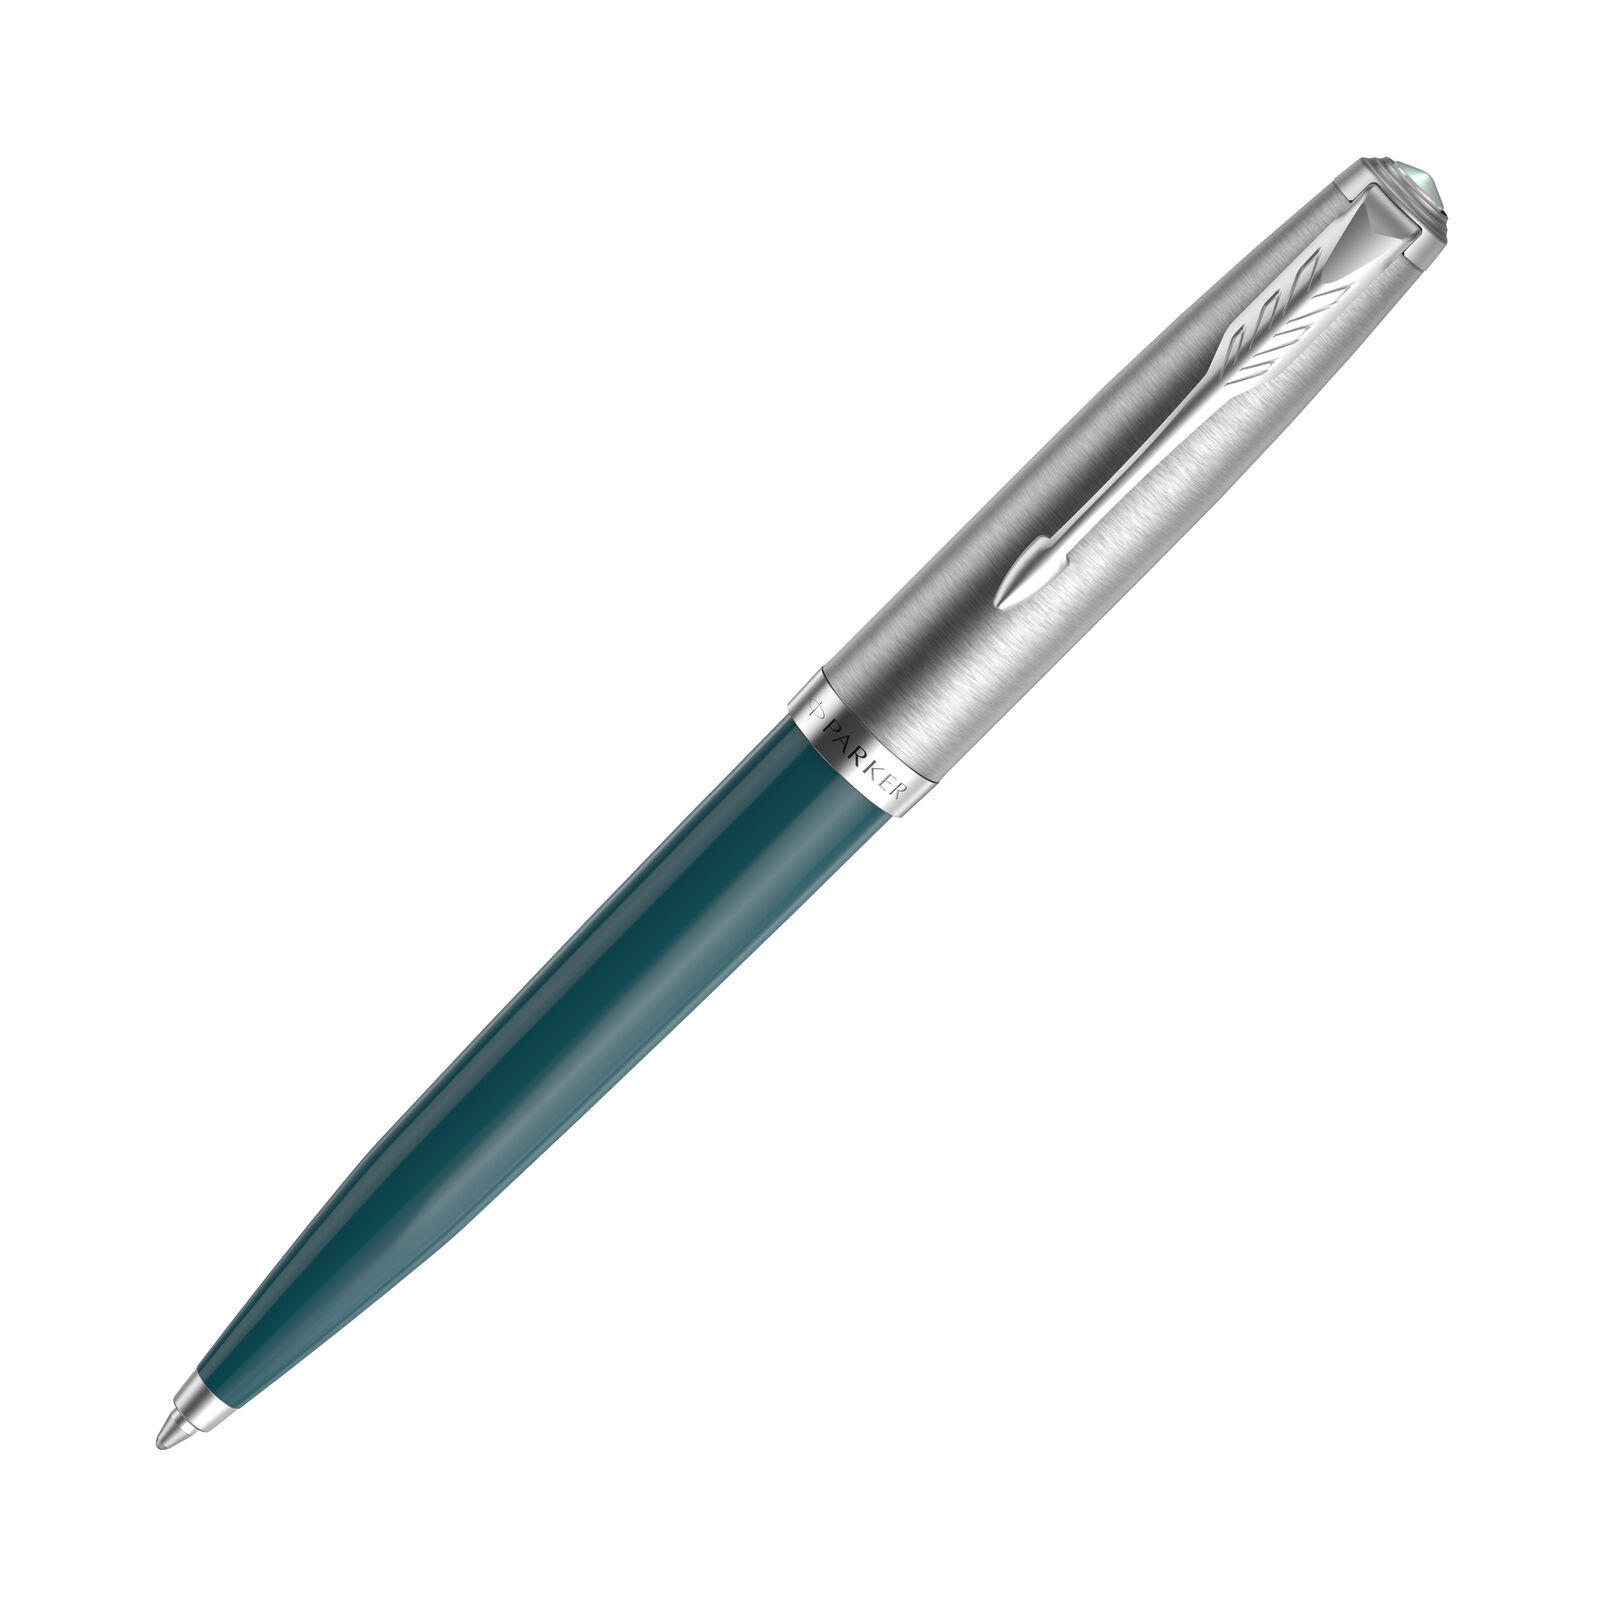 Parker 51 Ballpoint Pen in Teal Blue with Chrome Trim - NEW in Original Box